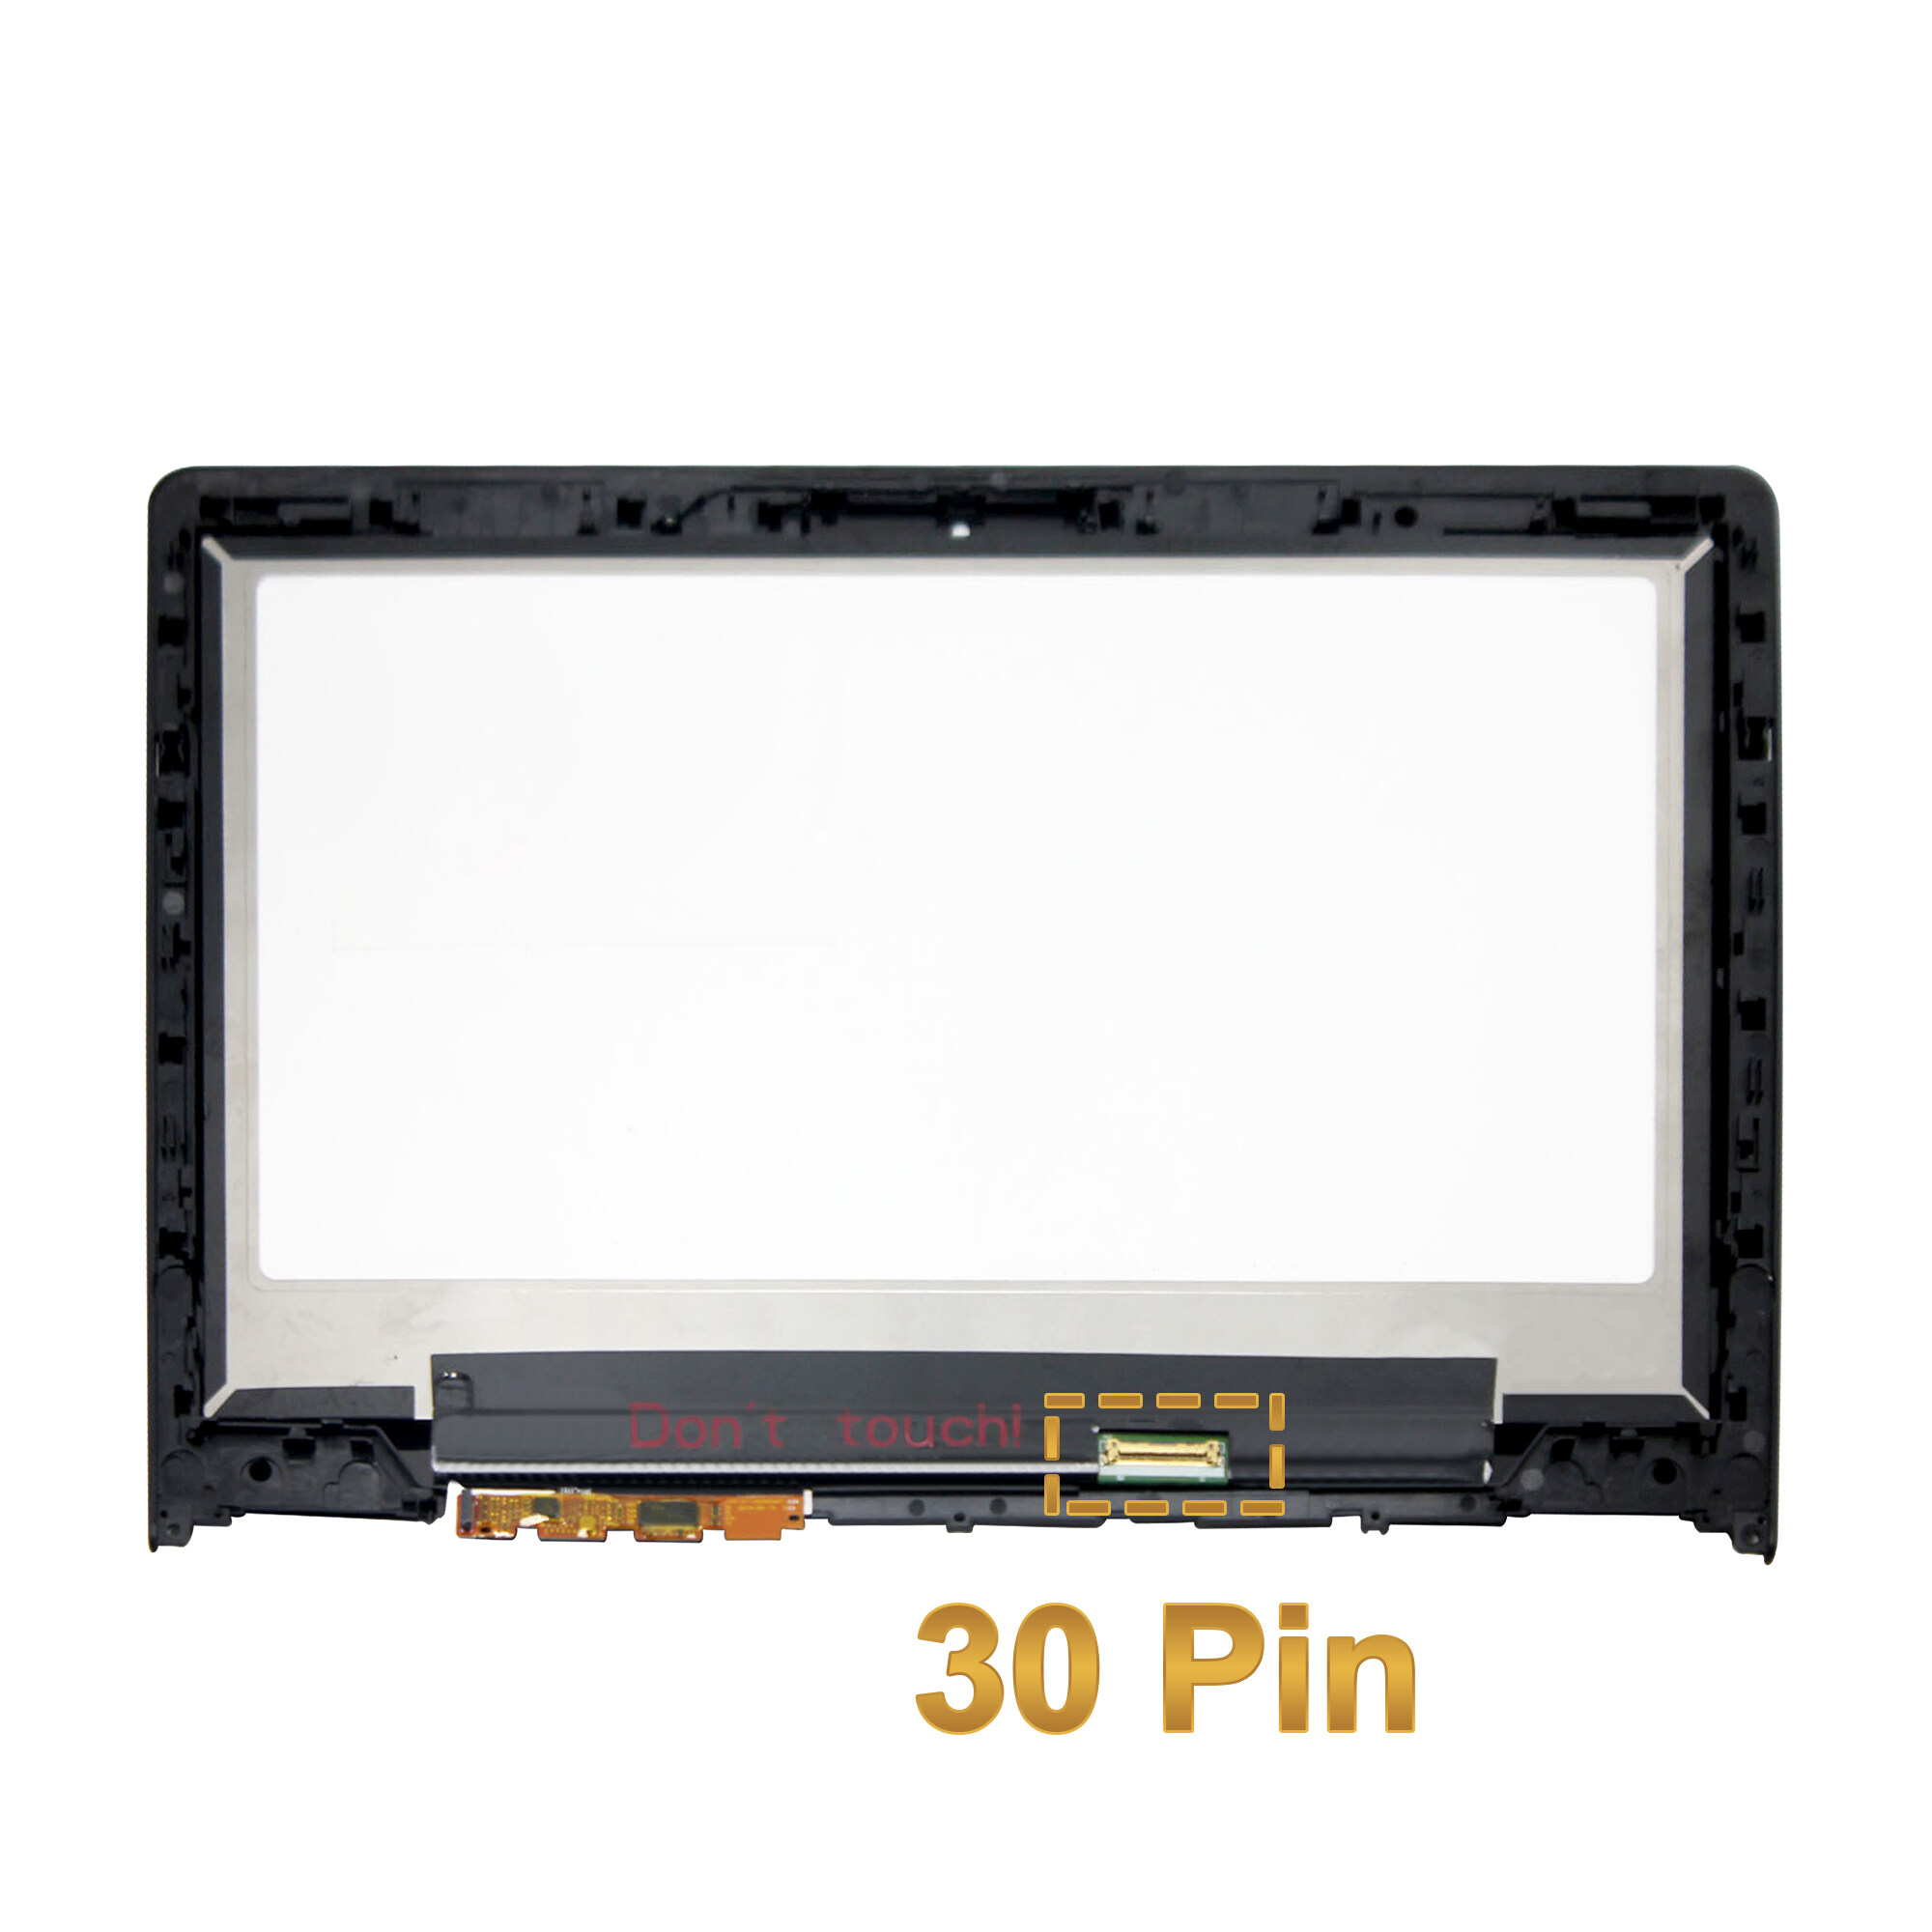 11.6" FHD LCD Touch Screen Digitizer Assembly for Lenovo Yoga 3 11 80J8